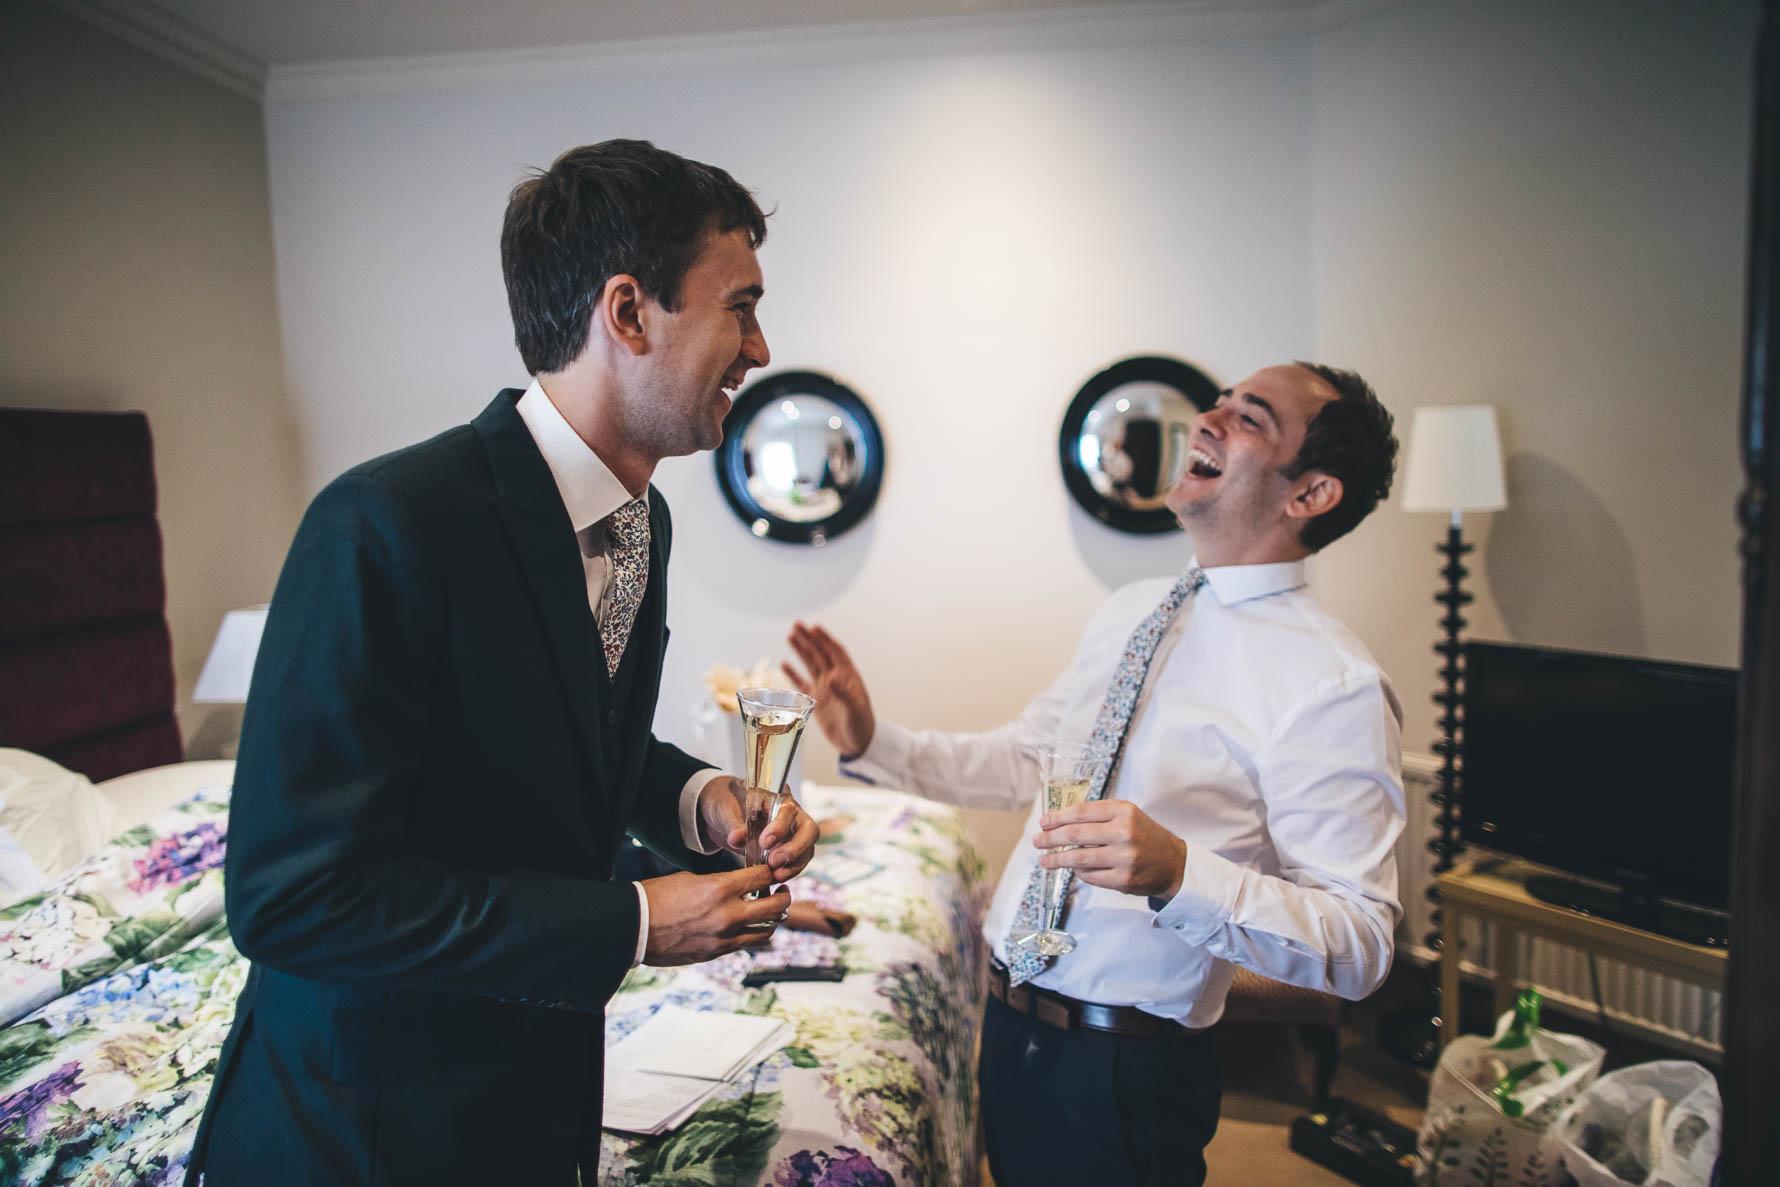 Groom and friend facing each other, laughing, next to a bed in a hotel room holding glasses of champagne.